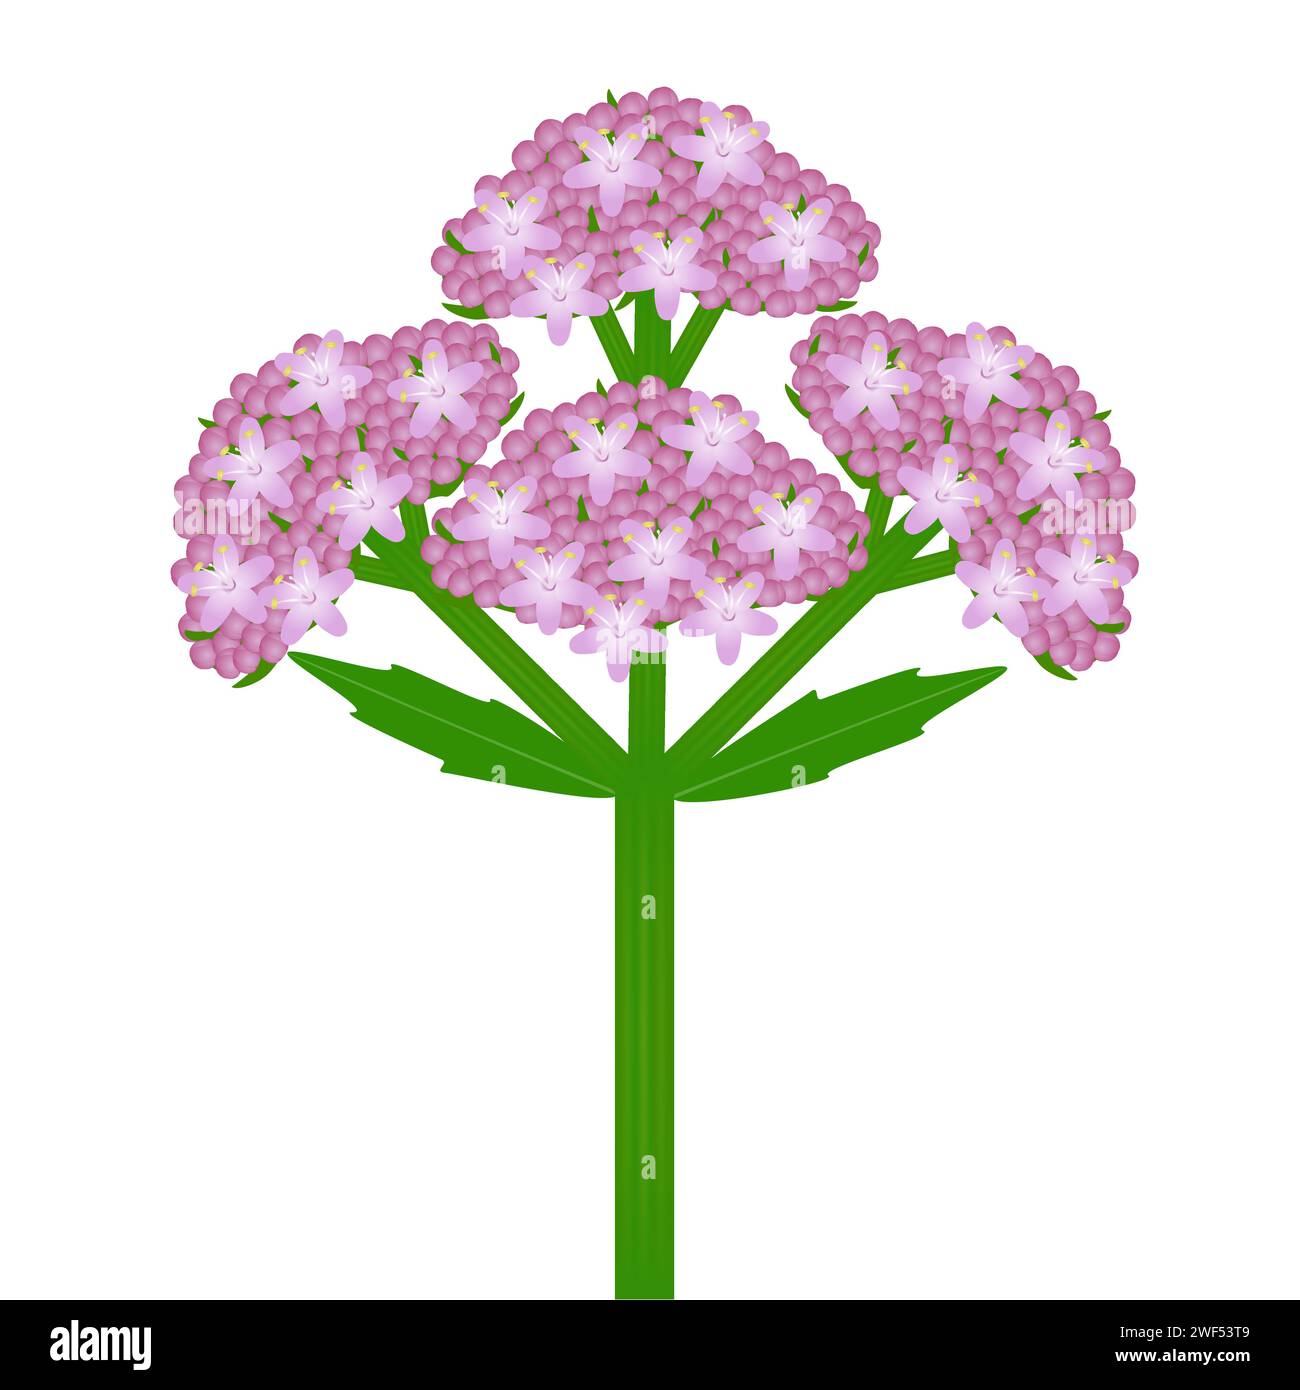 Inflorescence of a valerian plant with leaves on a white background. Stock Vector